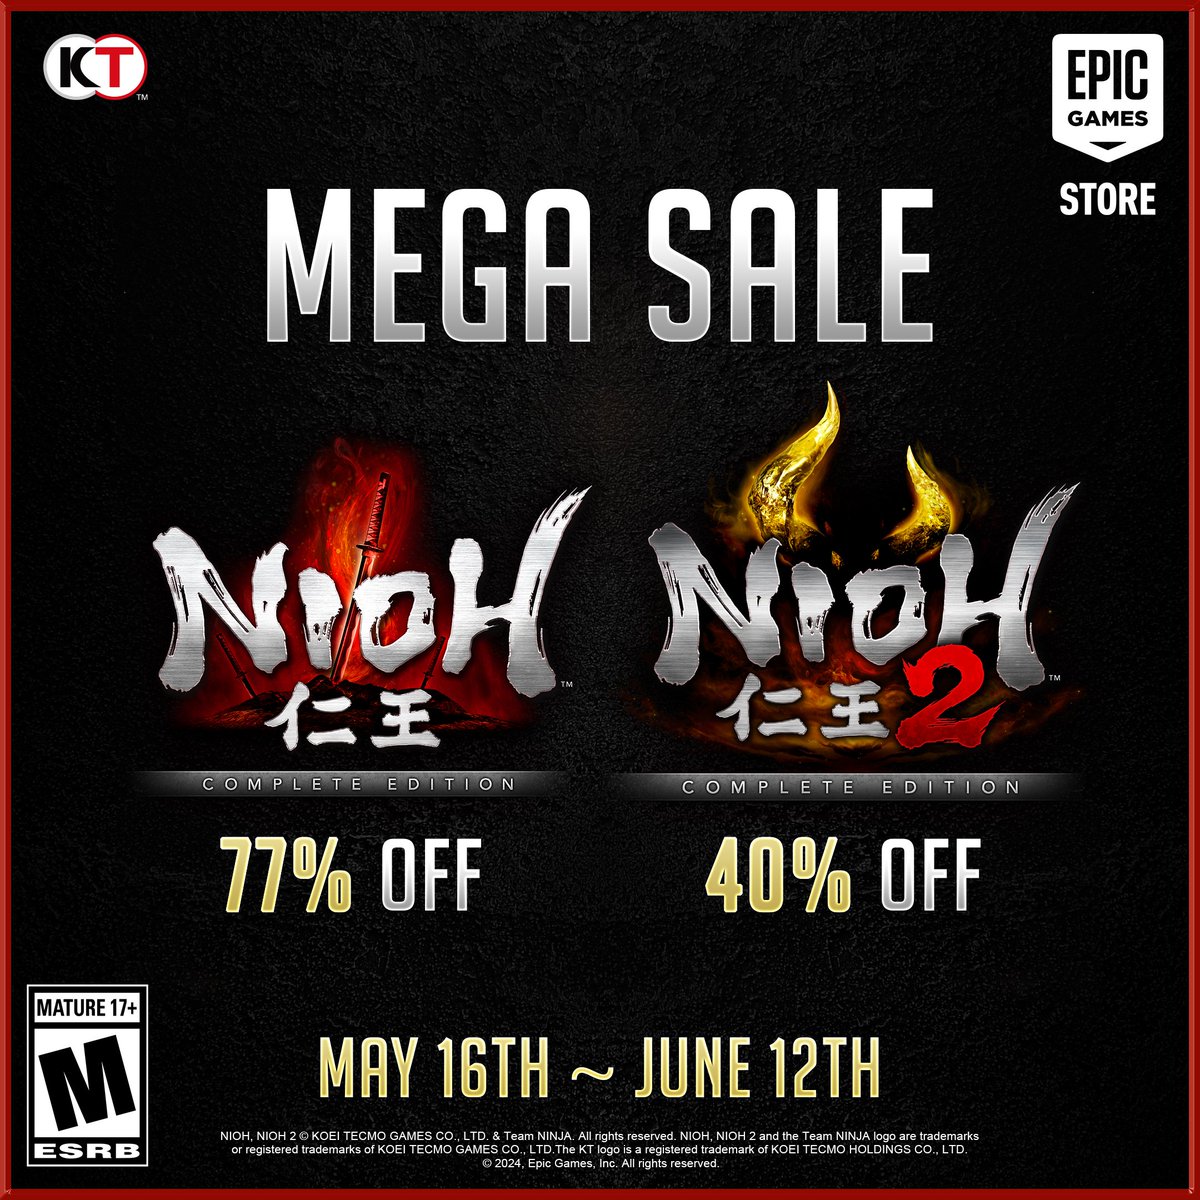 Nioh and Nioh 2 are discounted during the #EpicGames Mega Sale! Get them now on your Epic account before the sale is over. Sale ends June 12th. #NiohCE - tinyurl.com/42k3sk5n #Nioh2 - tinyurl.com/558jhx7h #Nioh #Nioh2 #PC